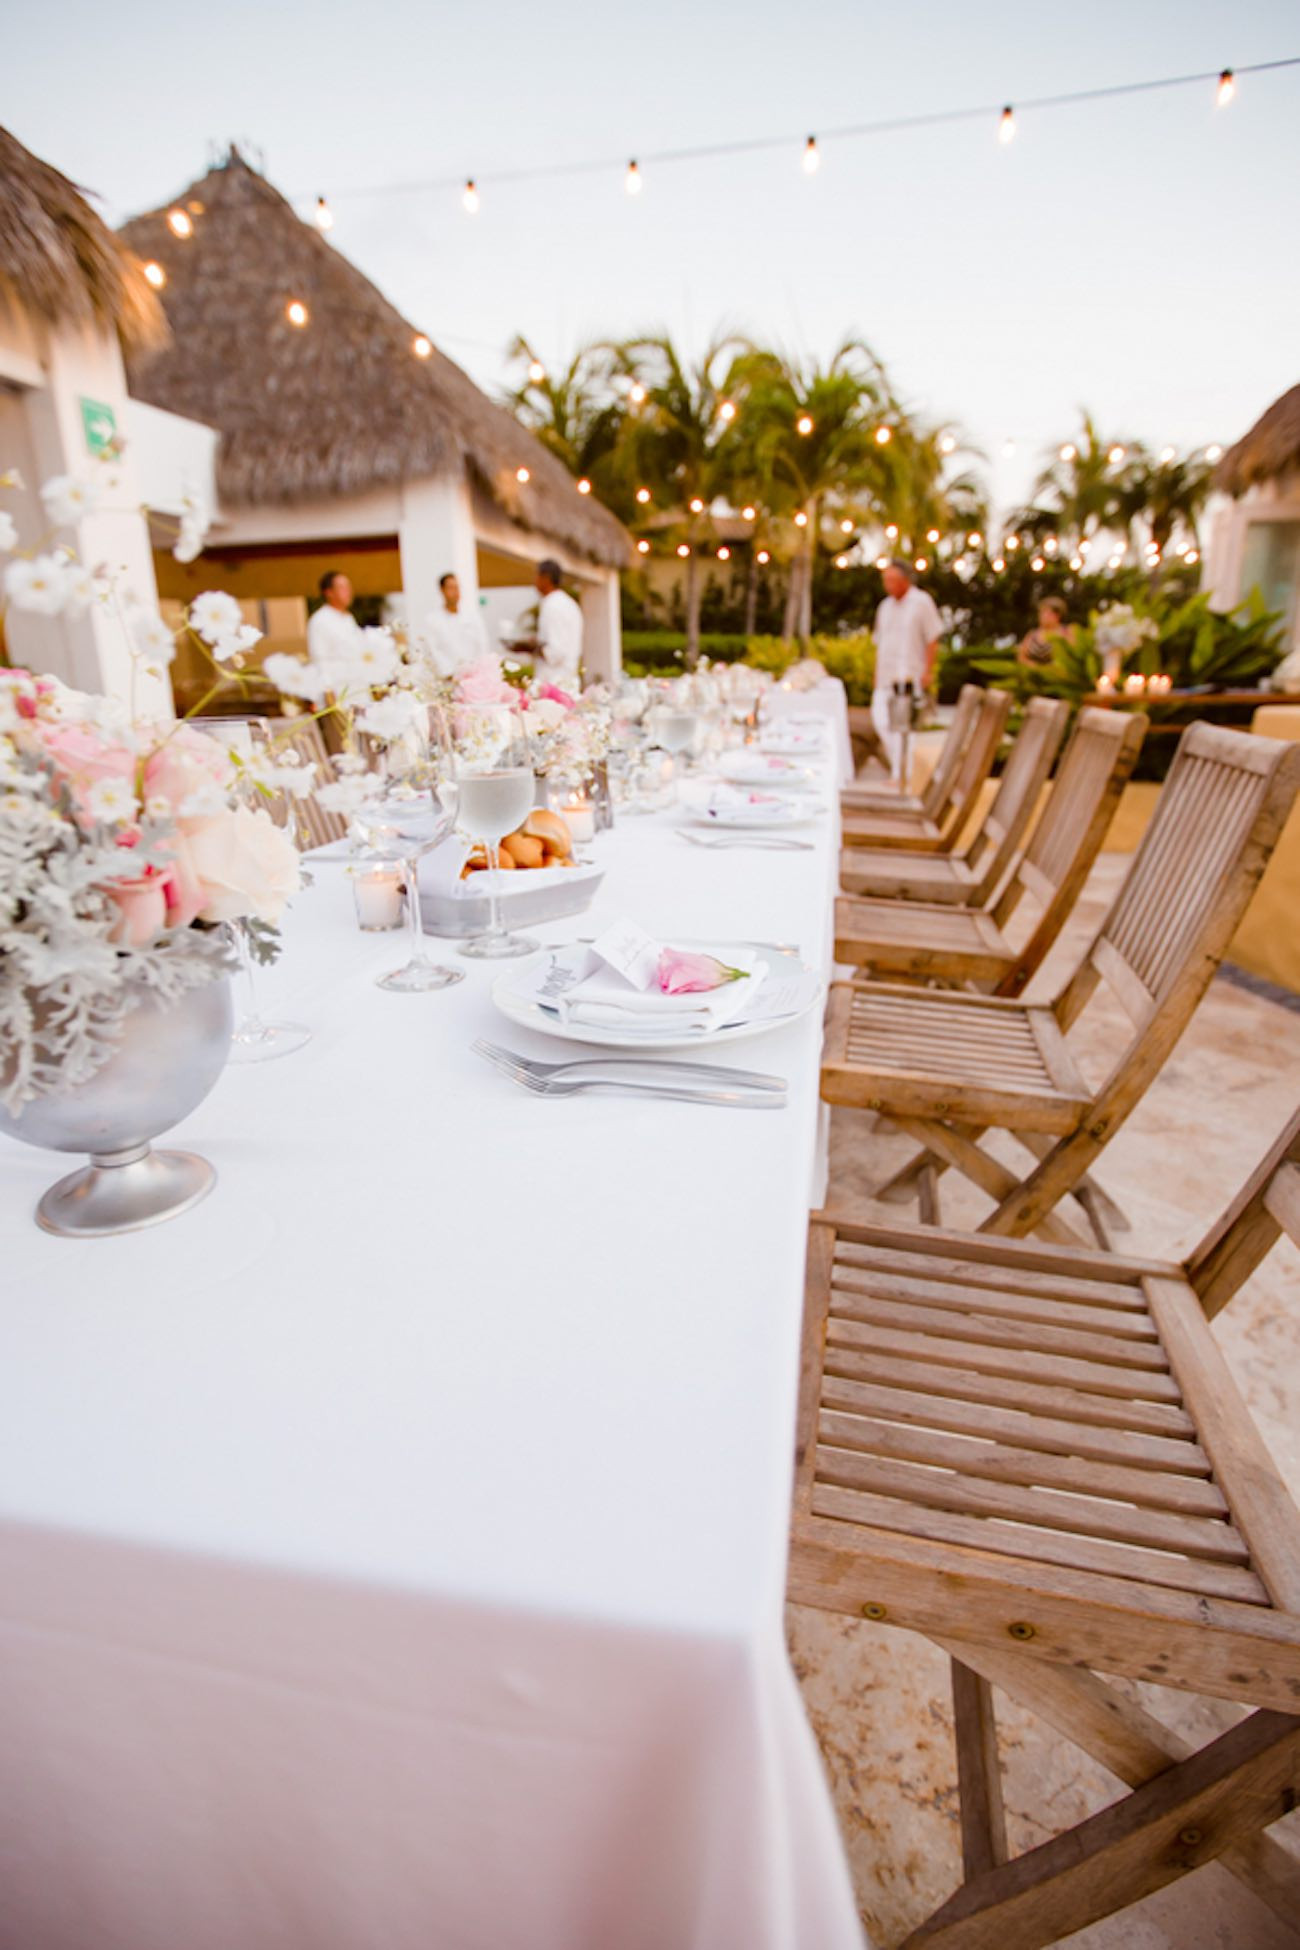 Beach Themed Engagement Party Ideas
 25 Beach Themed Wedding Projects & DIY Inspiration